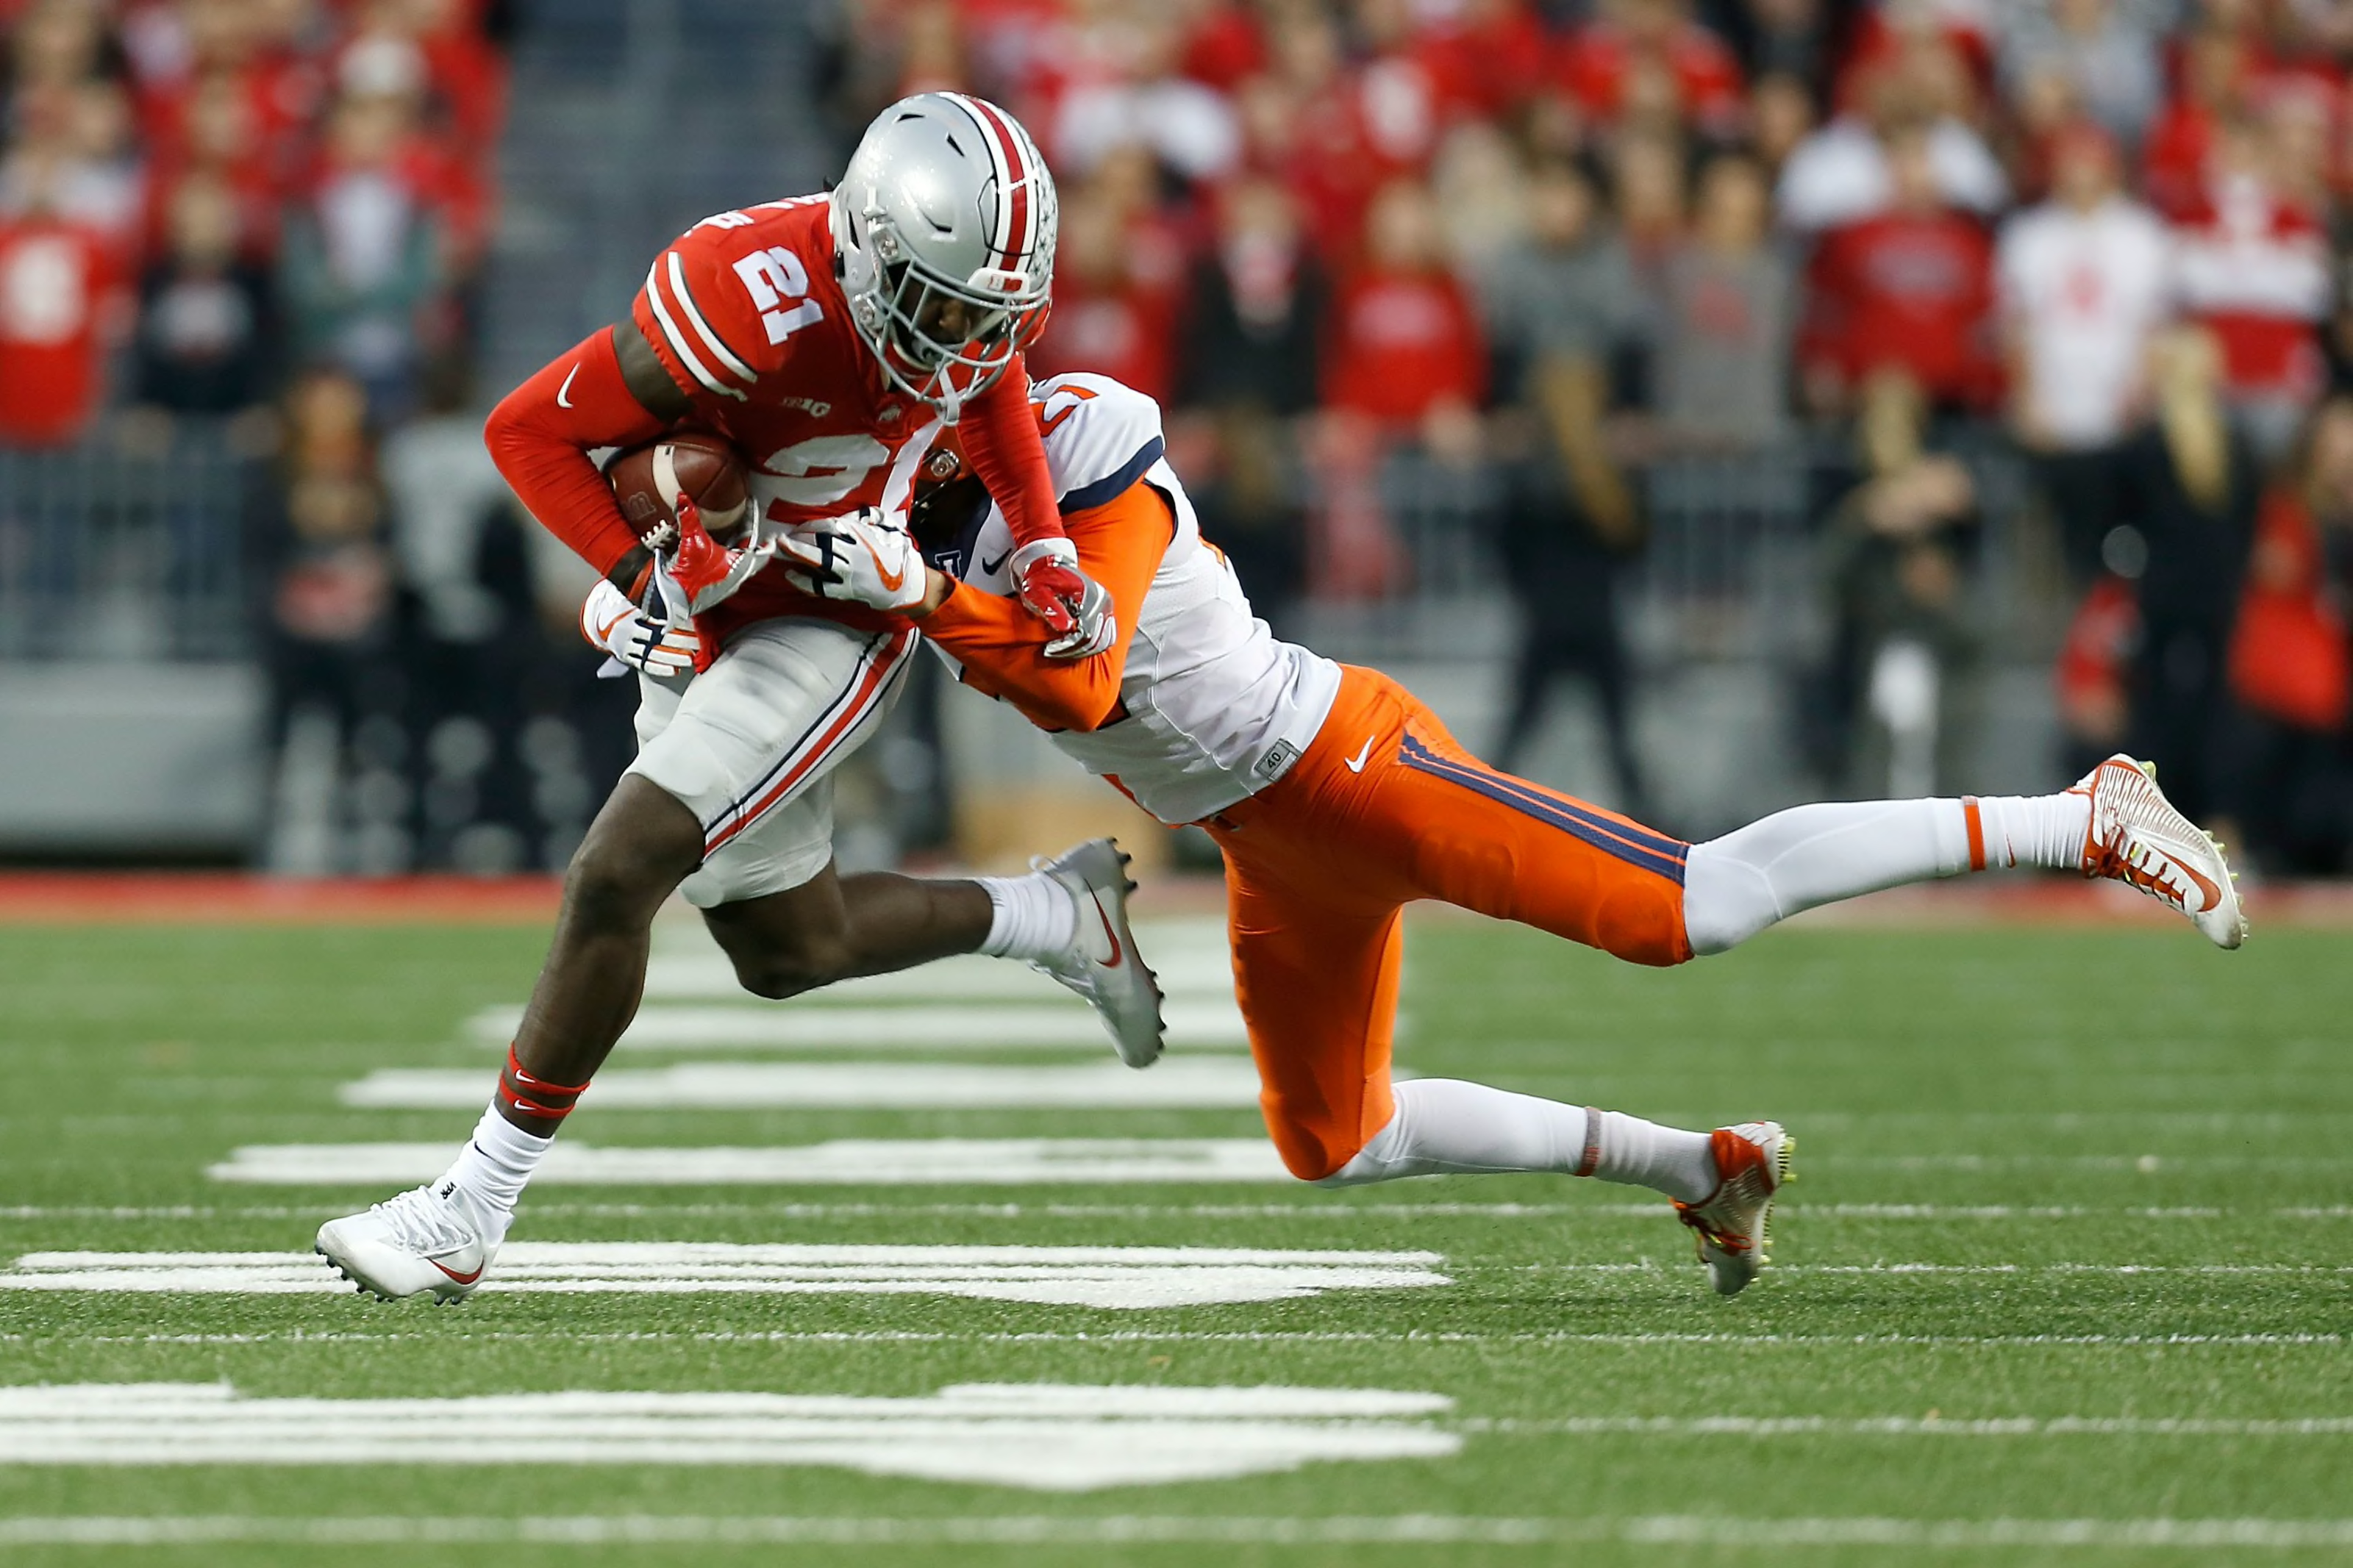 Ohio State football: Buckeyes have the talent to win it all in 2018